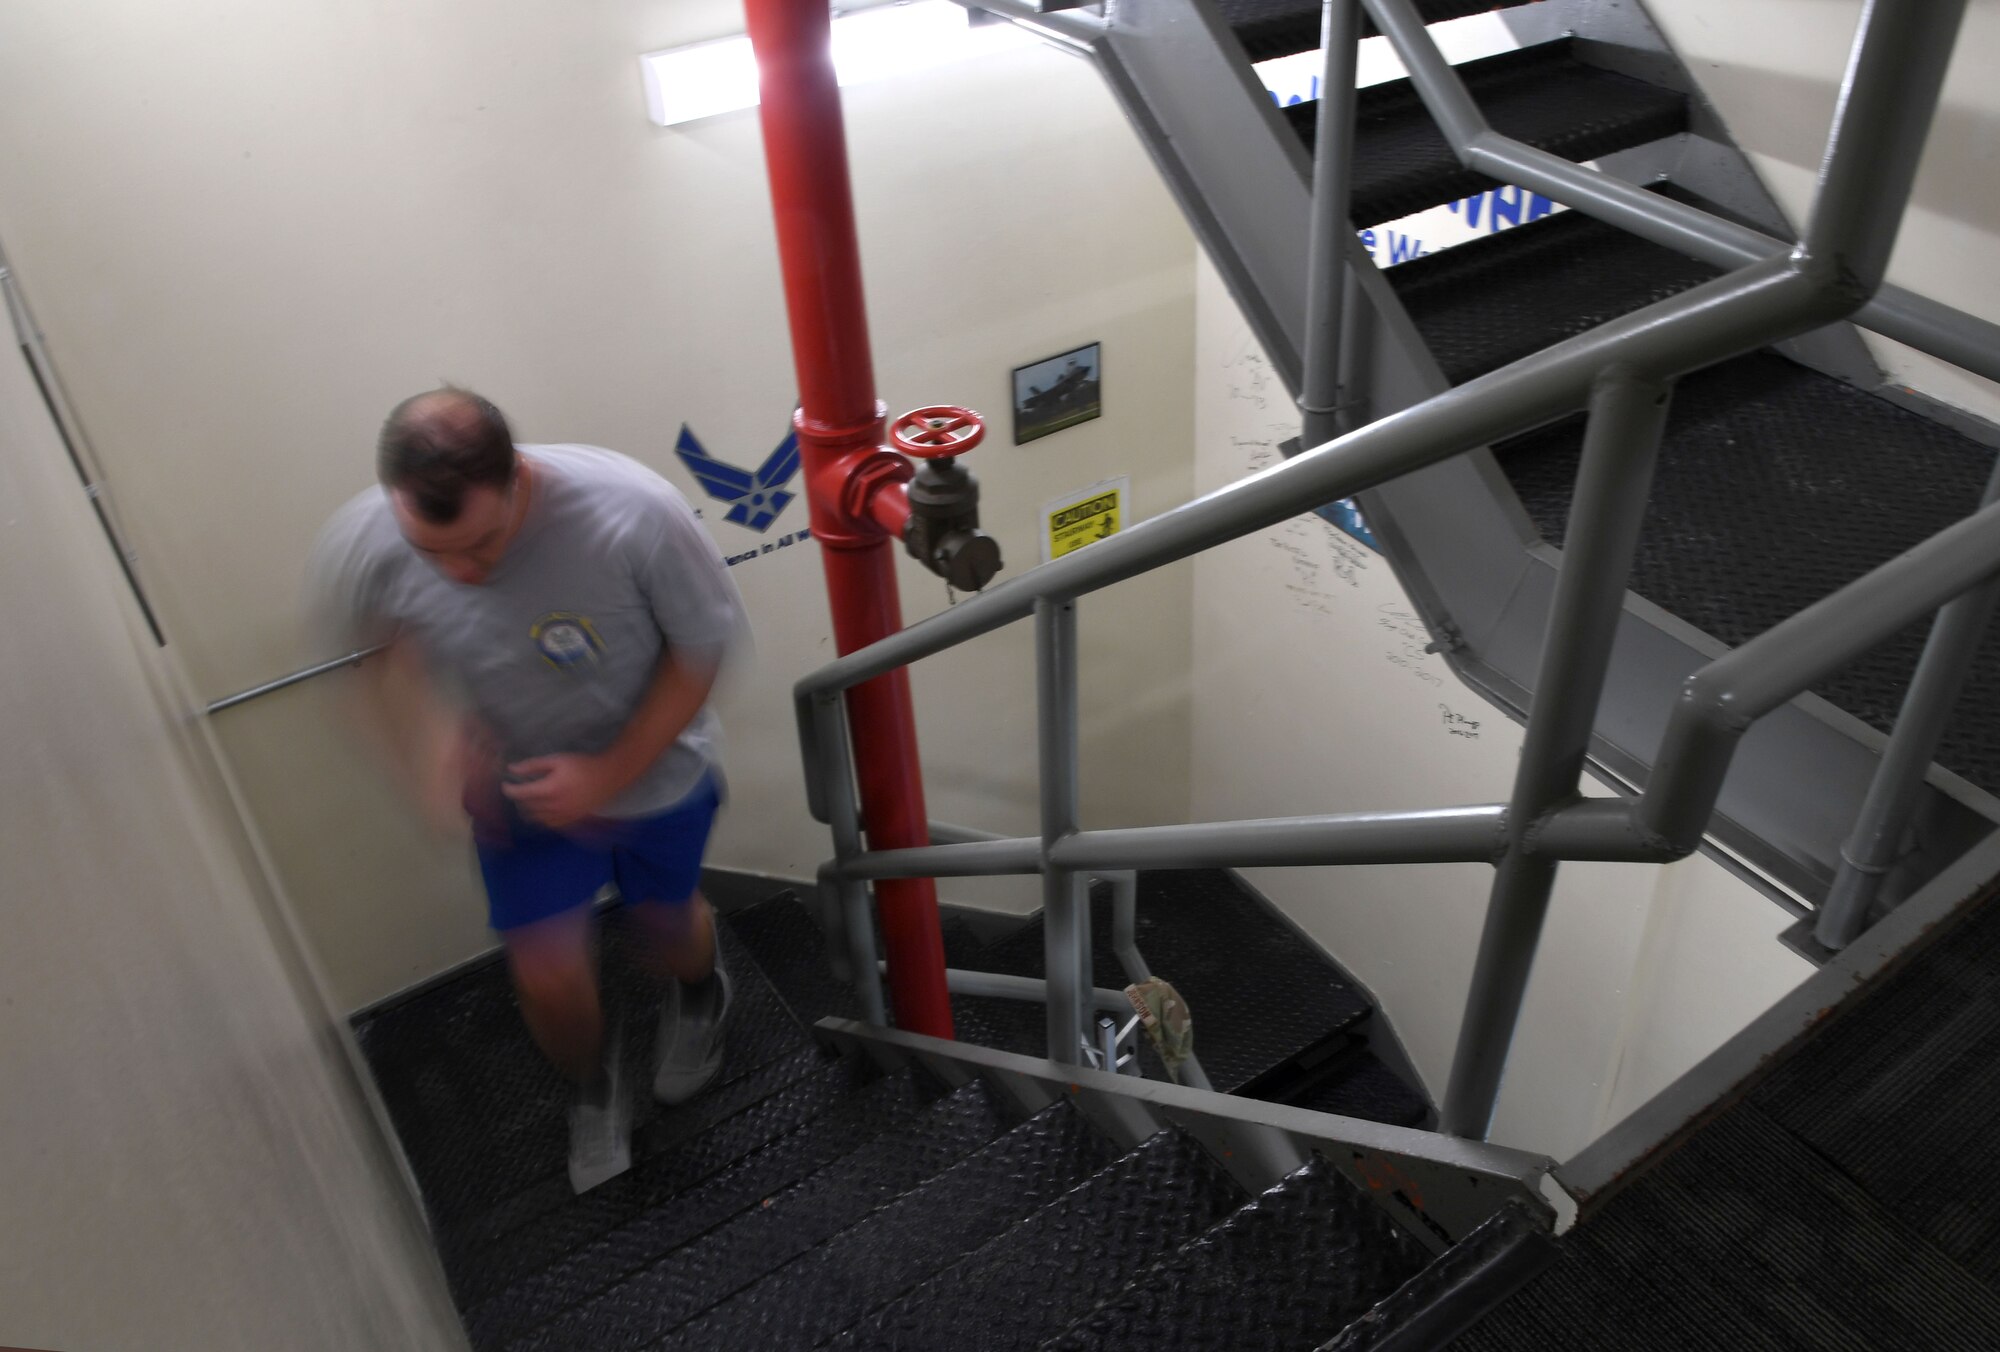 U.S. Air Force Capt. Nick Juliano, 81st Operations Support Flight commander, runs up a flight of stairs during the 9/11 Tower Run inside the air traffic control tower at Keesler Air Force Base, Mississippi, Sept. 9, 2022. The event honored those who lost their lives during the 9/11 attacks. (U.S. Air Force photo by Kemberly Groue)